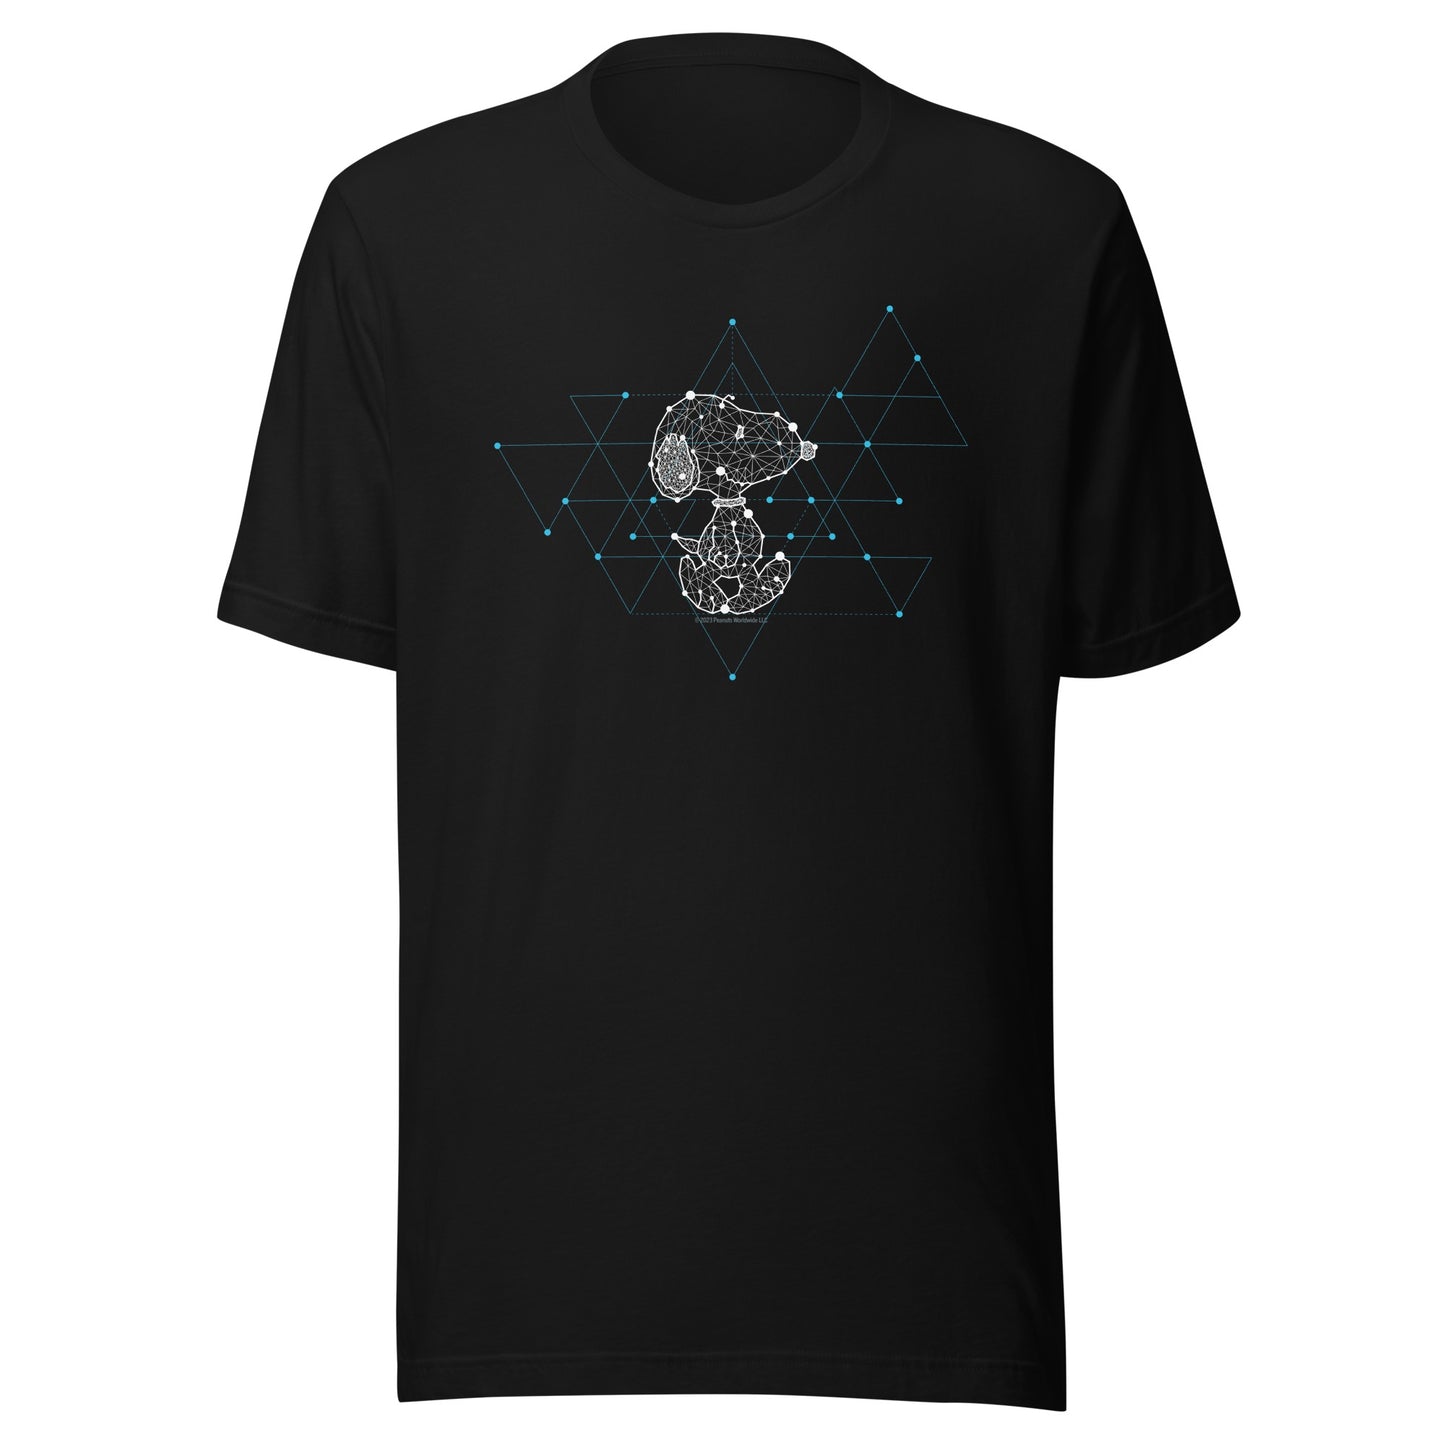 Snoopy Constellation Adult T-Shirt